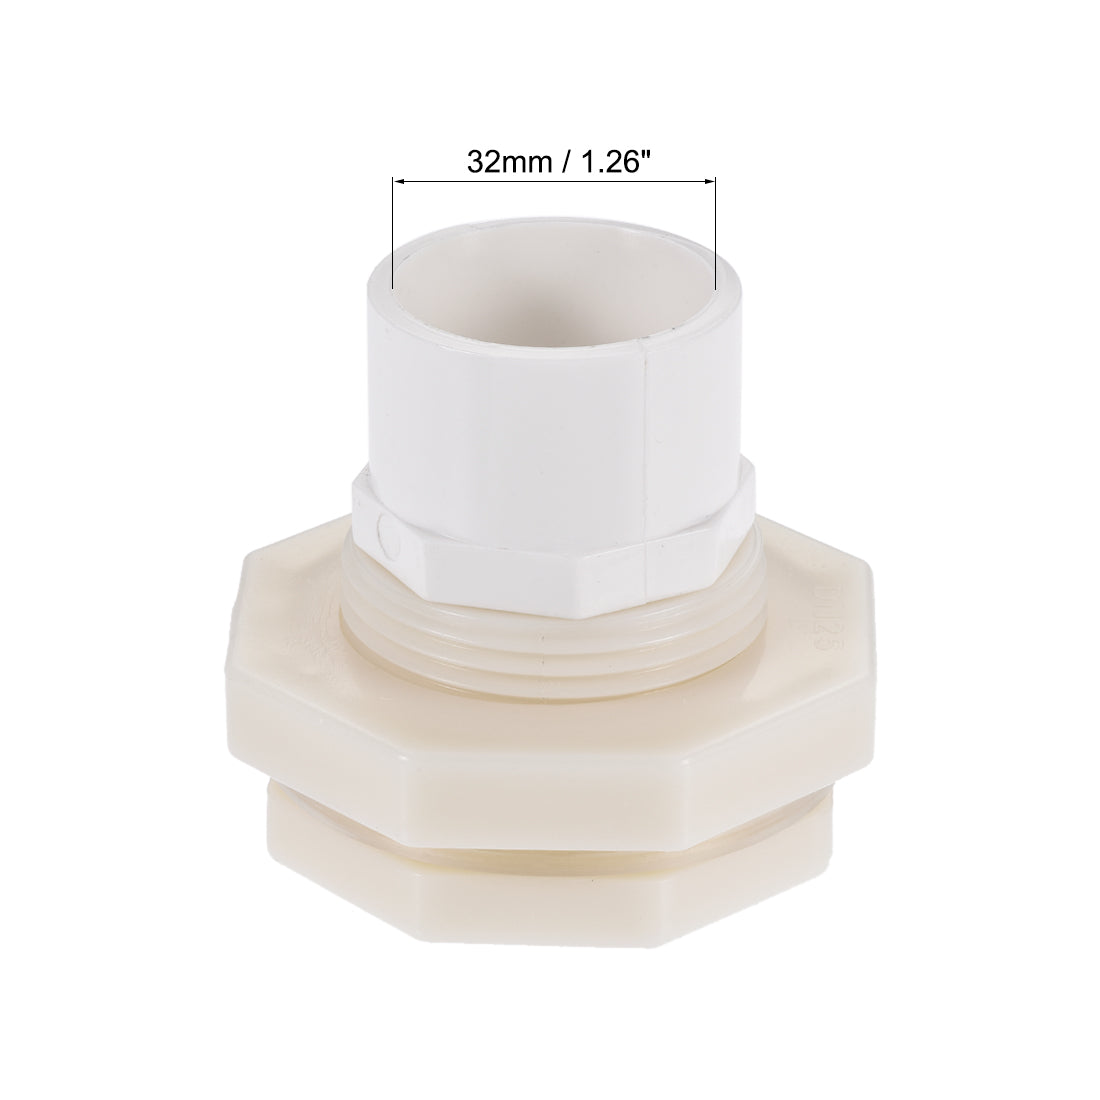 uxcell Uxcell Bulkhead Fitting, G1 Female 1.73" Male, Tube Adaptor Fitting, with Silicone Gasket and Pipe Connector, for Water Tanks, PVC, White